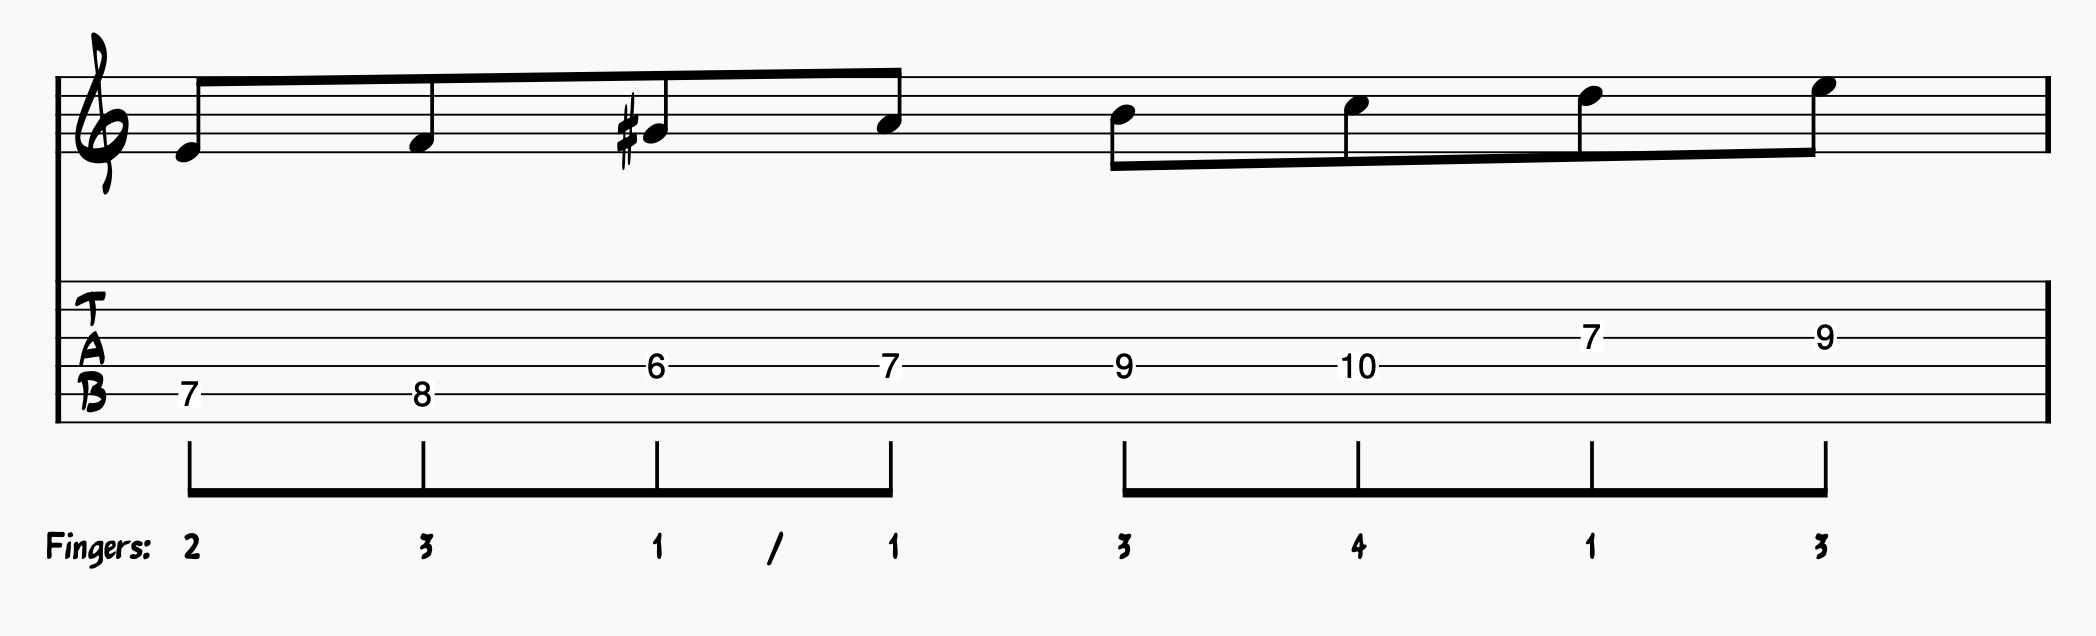 E Phrygian Dominant; the fifth mode of A harmonic minor